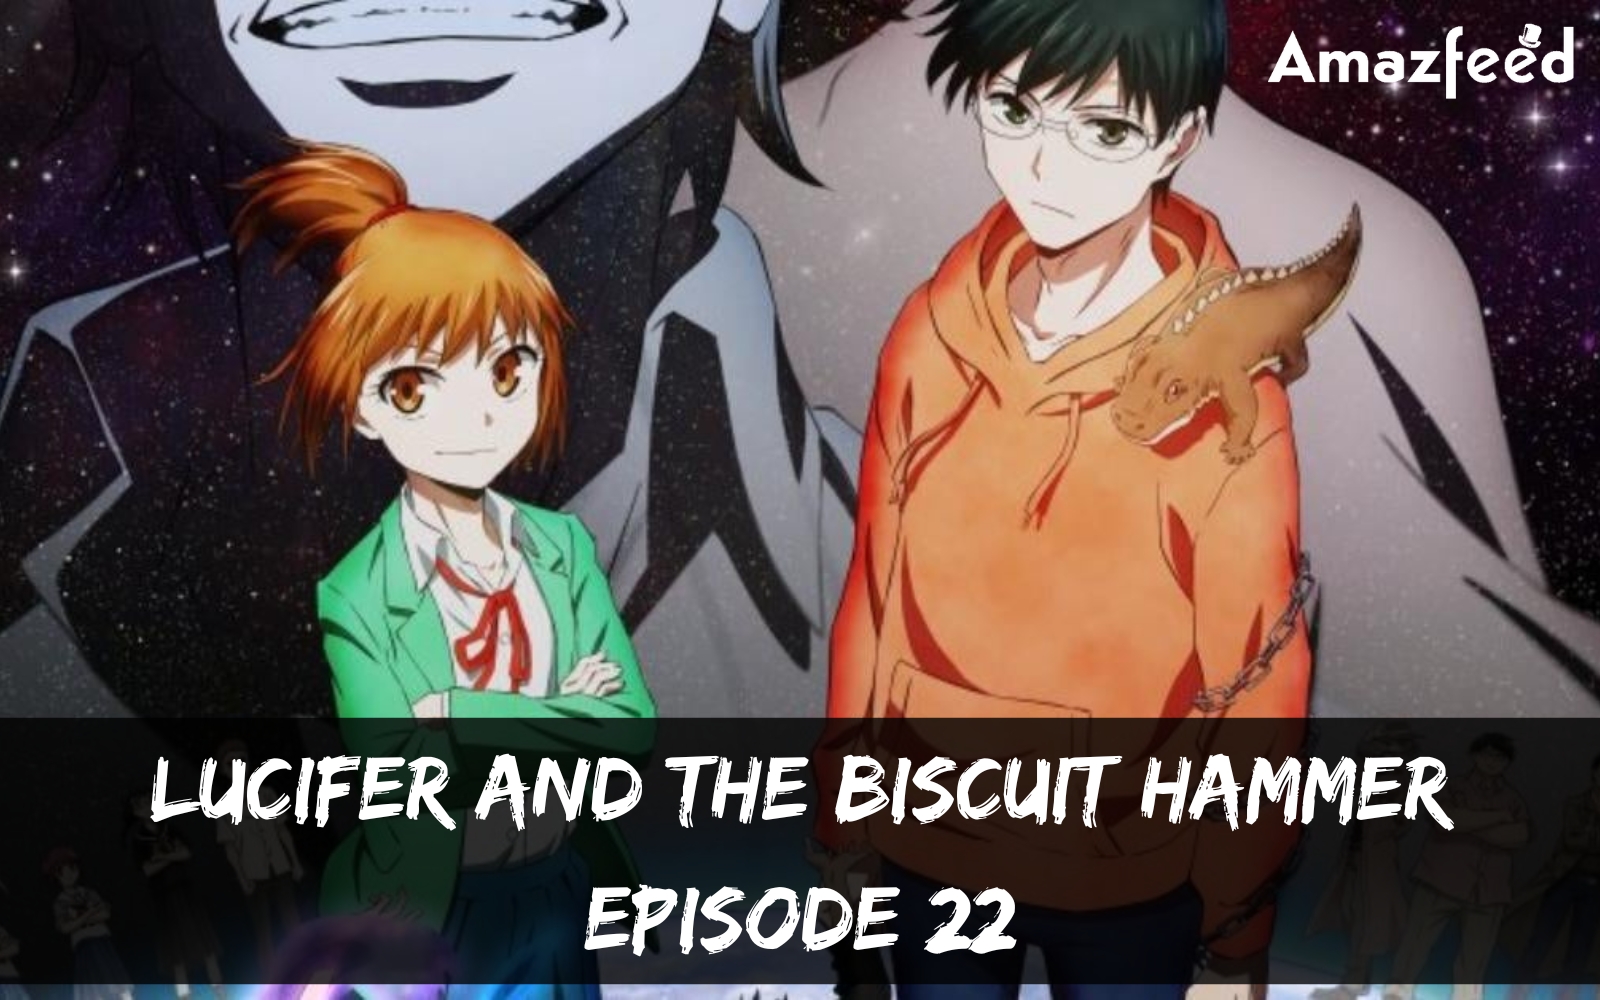 Lucifer and the Biscuit Hammer Episode 22